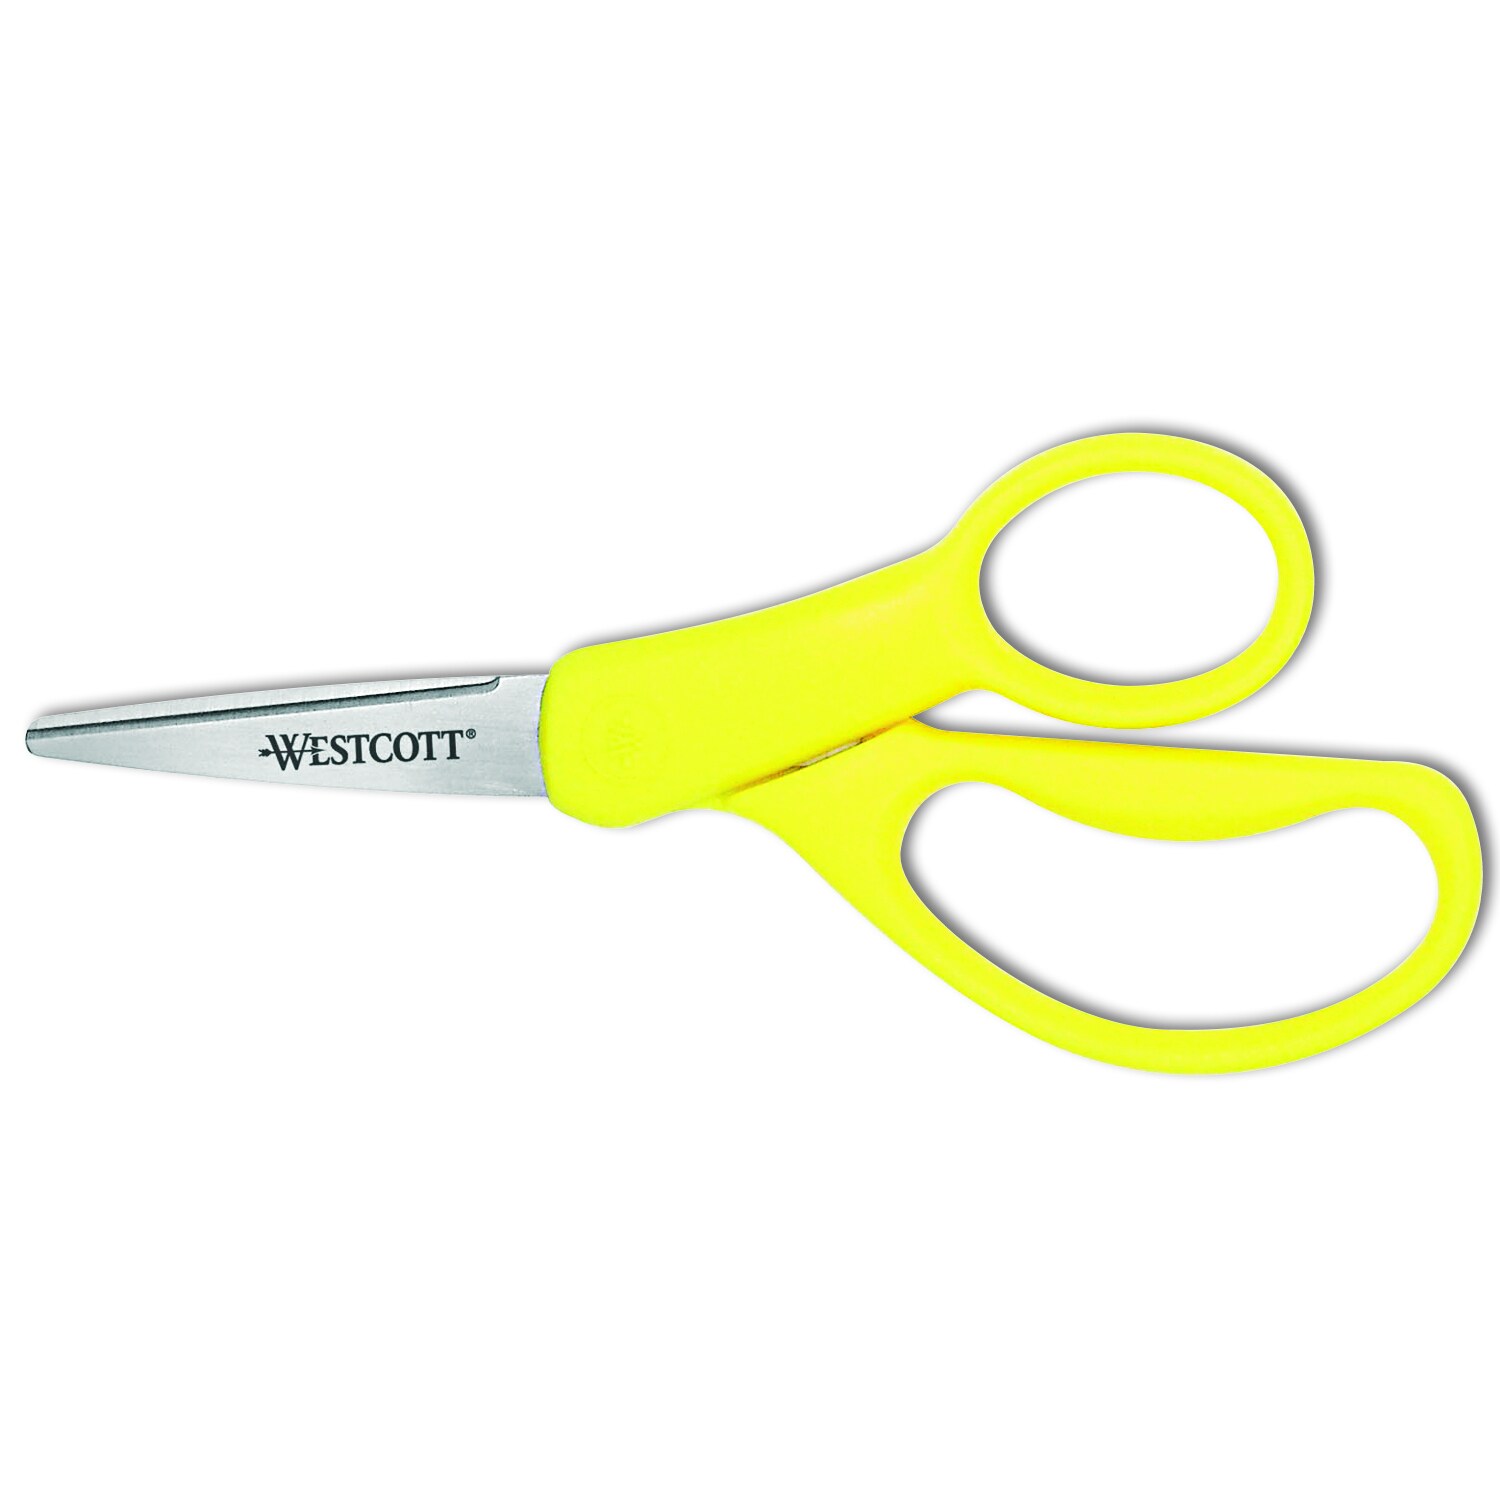 Scissors & Paper Trimmers Buy Paper Trimmers